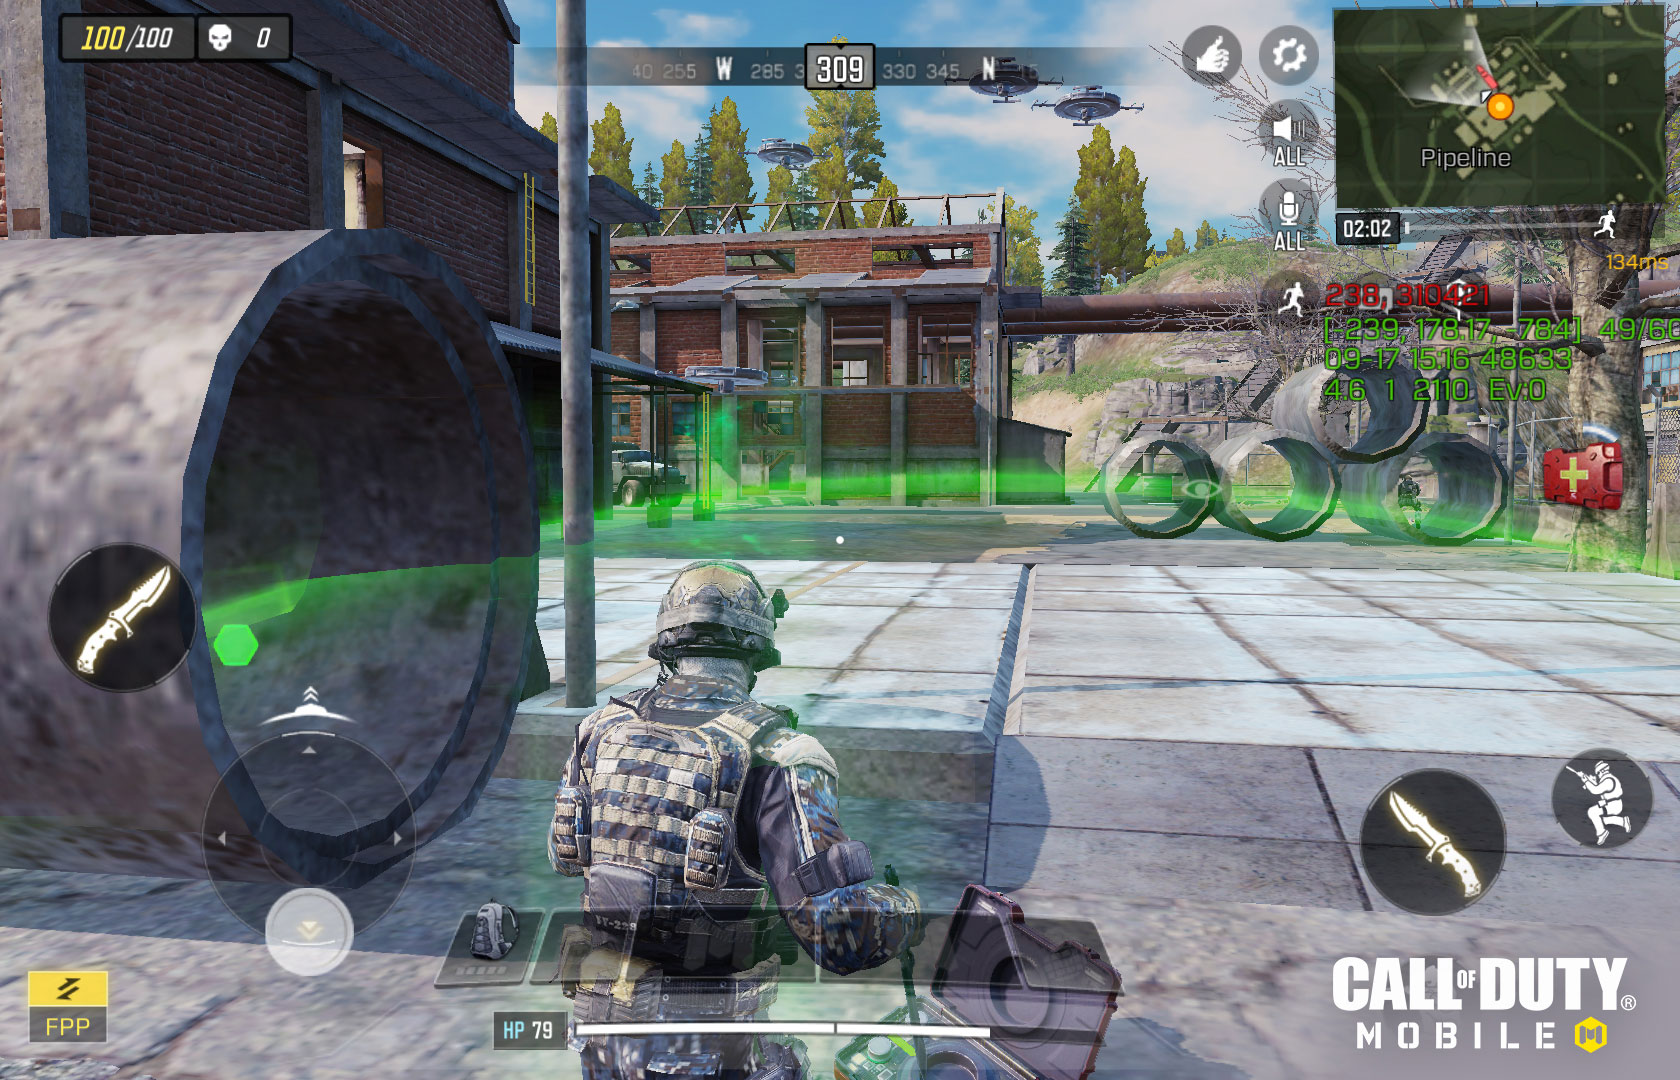 Call of Duty Mobile modes: Everything you need to know - Times of